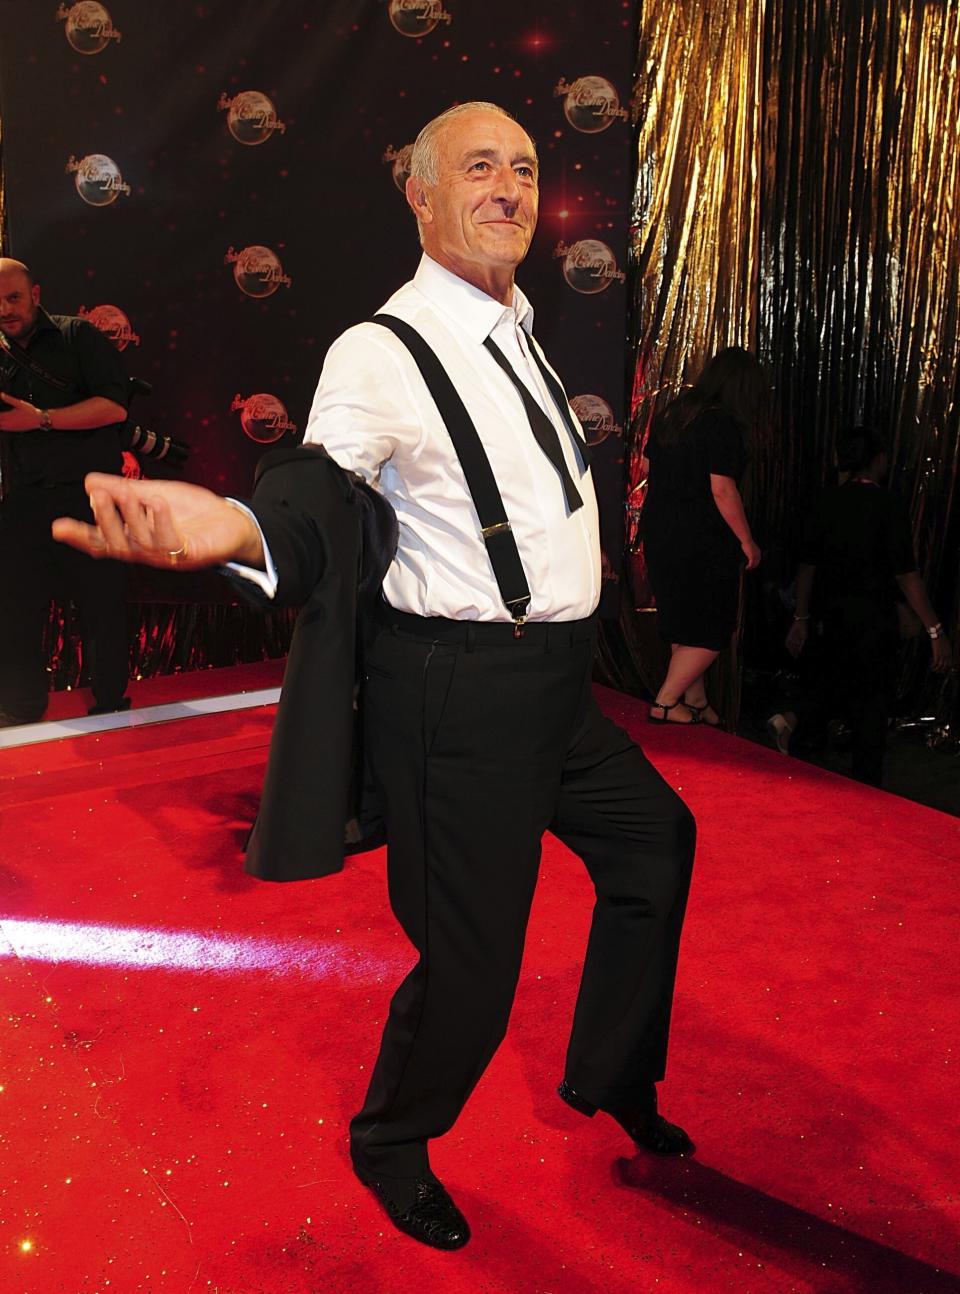 FILE - Len Goodman poses as he arrives for the Strictly Come Dancing Photocall at Elstree Studios, London, Sept 3, 2013. Len Goodman, an urbane long-serving judge on “Dancing with the Stars” and “Strictly Come Dancing,” has died, his agent said Monday, April 24, 2023. He was 78. A former dancer, Goodman was a judge on “Strictly Come Dancing” for 12 years from its launch on the BBC in 2004. (Ian West/PA via AP, File)